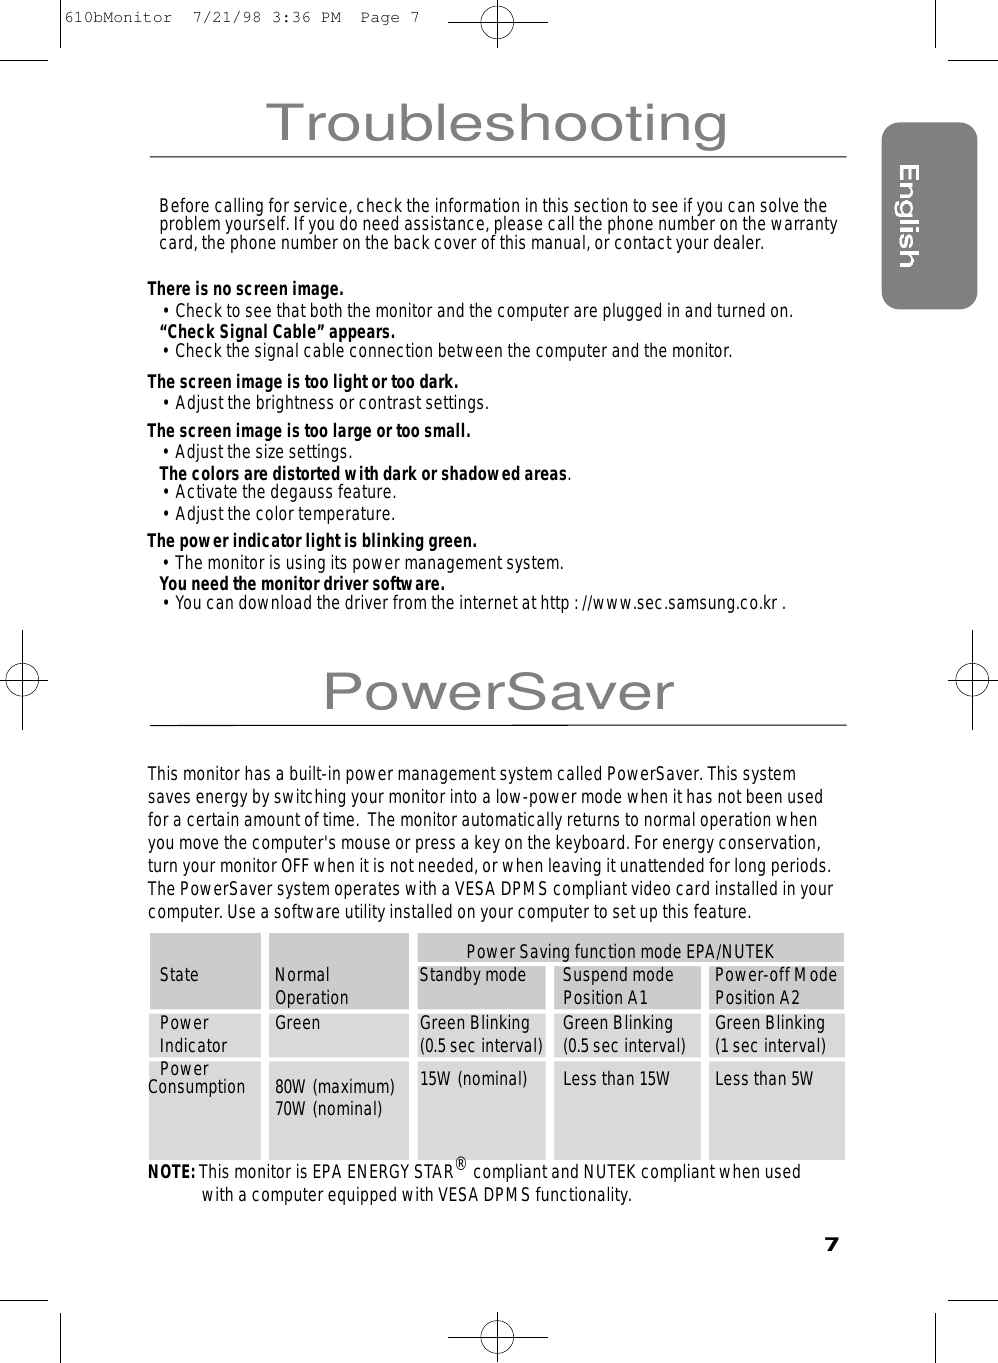 7TroubleshootingPowerSaverBefore calling for service, check the information in this section to see if you can solve theproblem yourself. If you do need assistance, please call the phone number on the warrantycard, the phone number on the back cover of this manual, or contact your dealer.There is no screen image.• Check to see that both the monitor and the computer are plugged in and turned on.“Check Signal Cable” appears.• Check the signal cable connection between the computer and the monitor.The screen image is too light or too dark.• Adjust the brightness or contrast settings.The screen image is too large or too small.• Adjust the size settings.The colors are distorted with dark or shadowed areas.• Activate the degauss feature.• Adjust the color temperature.The power indicator light is blinking green.• The monitor is using its power management system. You need the monitor driver software.• You can download the driver from the internet at http : //www.sec.samsung.co.kr .This monitor has a built-in power management system called PowerSaver. This systemsaves energy by switching your monitor into a low-power mode when it has not been usedfor a certain amount of time.  The monitor automatically returns to normal operation whenyou move the computer&apos;s mouse or press a key on the keyboard. For energy conservation,turn your monitor OFF when it is not needed, or when leaving it unattended for long periods.The PowerSaver system operates with a VESA DPMS compliant video card installed in yourcomputer. Use a software utility installed on your computer to set up this feature.  Power Saving function mode EPA/NUTEKState Normal  Standby mode Suspend mode  Power-off ModeOperation Position A1 Position A2Power Green Green Blinking Green Blinking Green BlinkingIndicator (0.5 sec interval) (0.5 sec interval) (1 sec interval)Power 15W (nominal) Less than 15W Less than 5WConsumption 80W (maximum)70W (nominal)NOTE: This monitor is EPA ENERGY STAR®compliant and NUTEK compliant when used with a computer equipped with VESADPMS functionality.610bMonitor  7/21/98 3:36 PM  Page 7